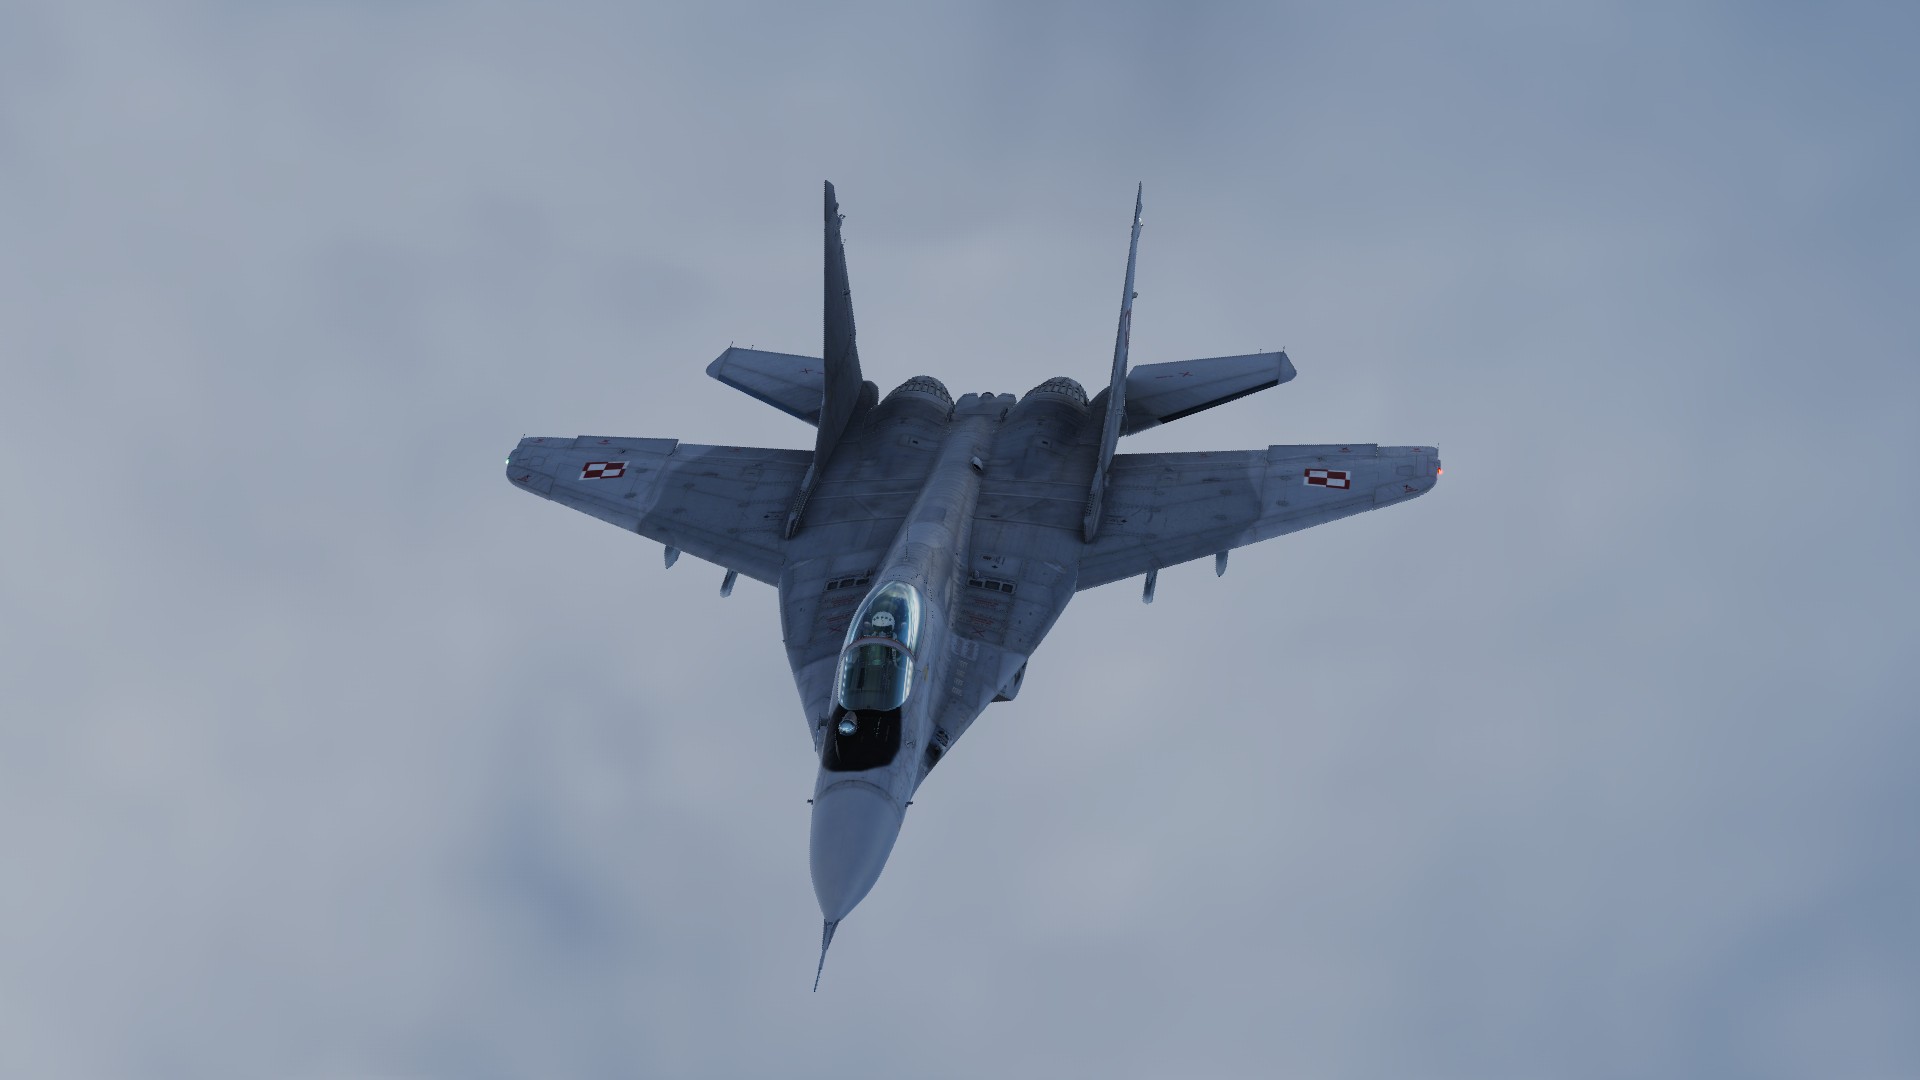 Polish Air Force MiG-29A (low-visibility)